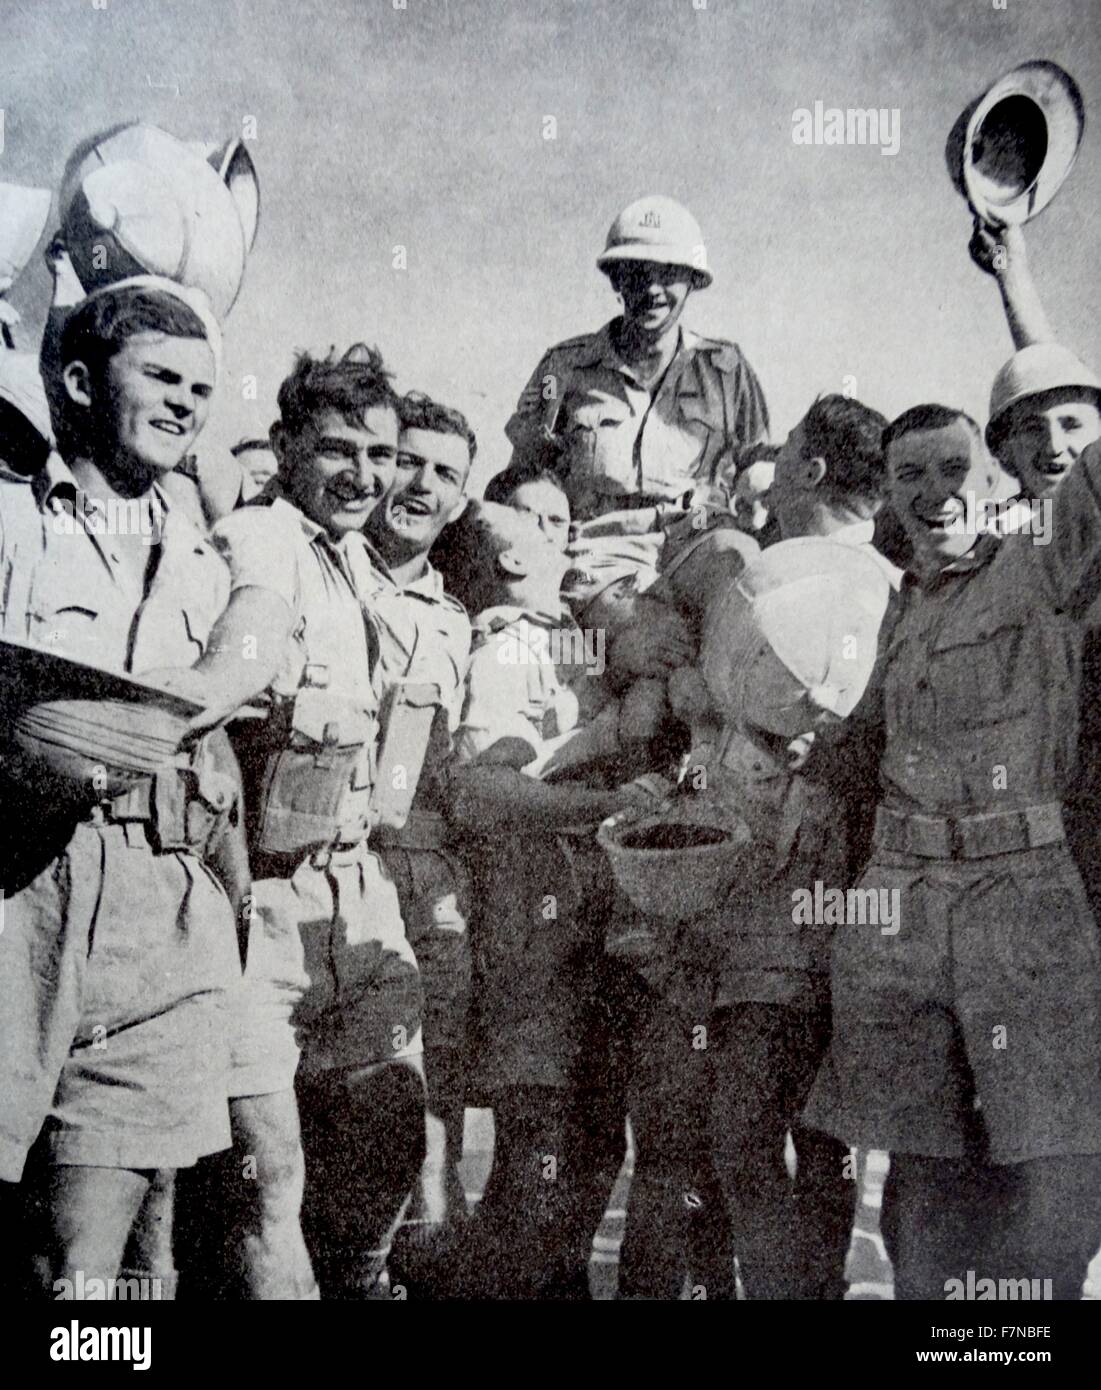 Photograph of Sergeant Quentin Smythe, South Africa's First recipient of the Victoria Cross, celebrating with his comrades of the Royal Natal Carabineers. 1942 Stock Photo